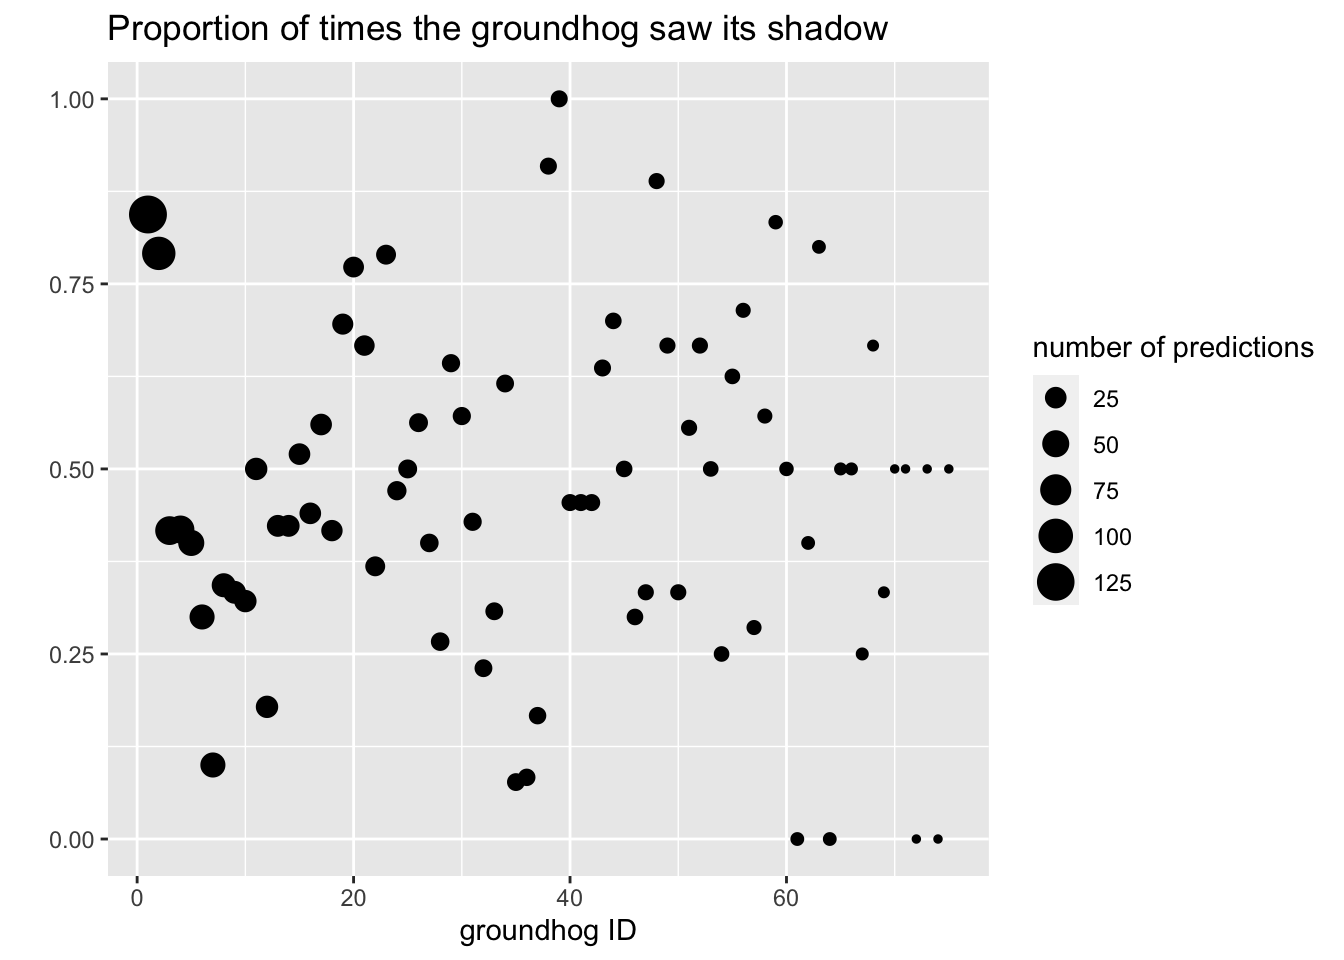 Scatterplot with groundhog ID on the x-axis and proportion of times it saw its shadow on the y-axis.  Each dot is sized by the total number of predictions that groundhog has made. There are no discernible patterns to the variables represented.